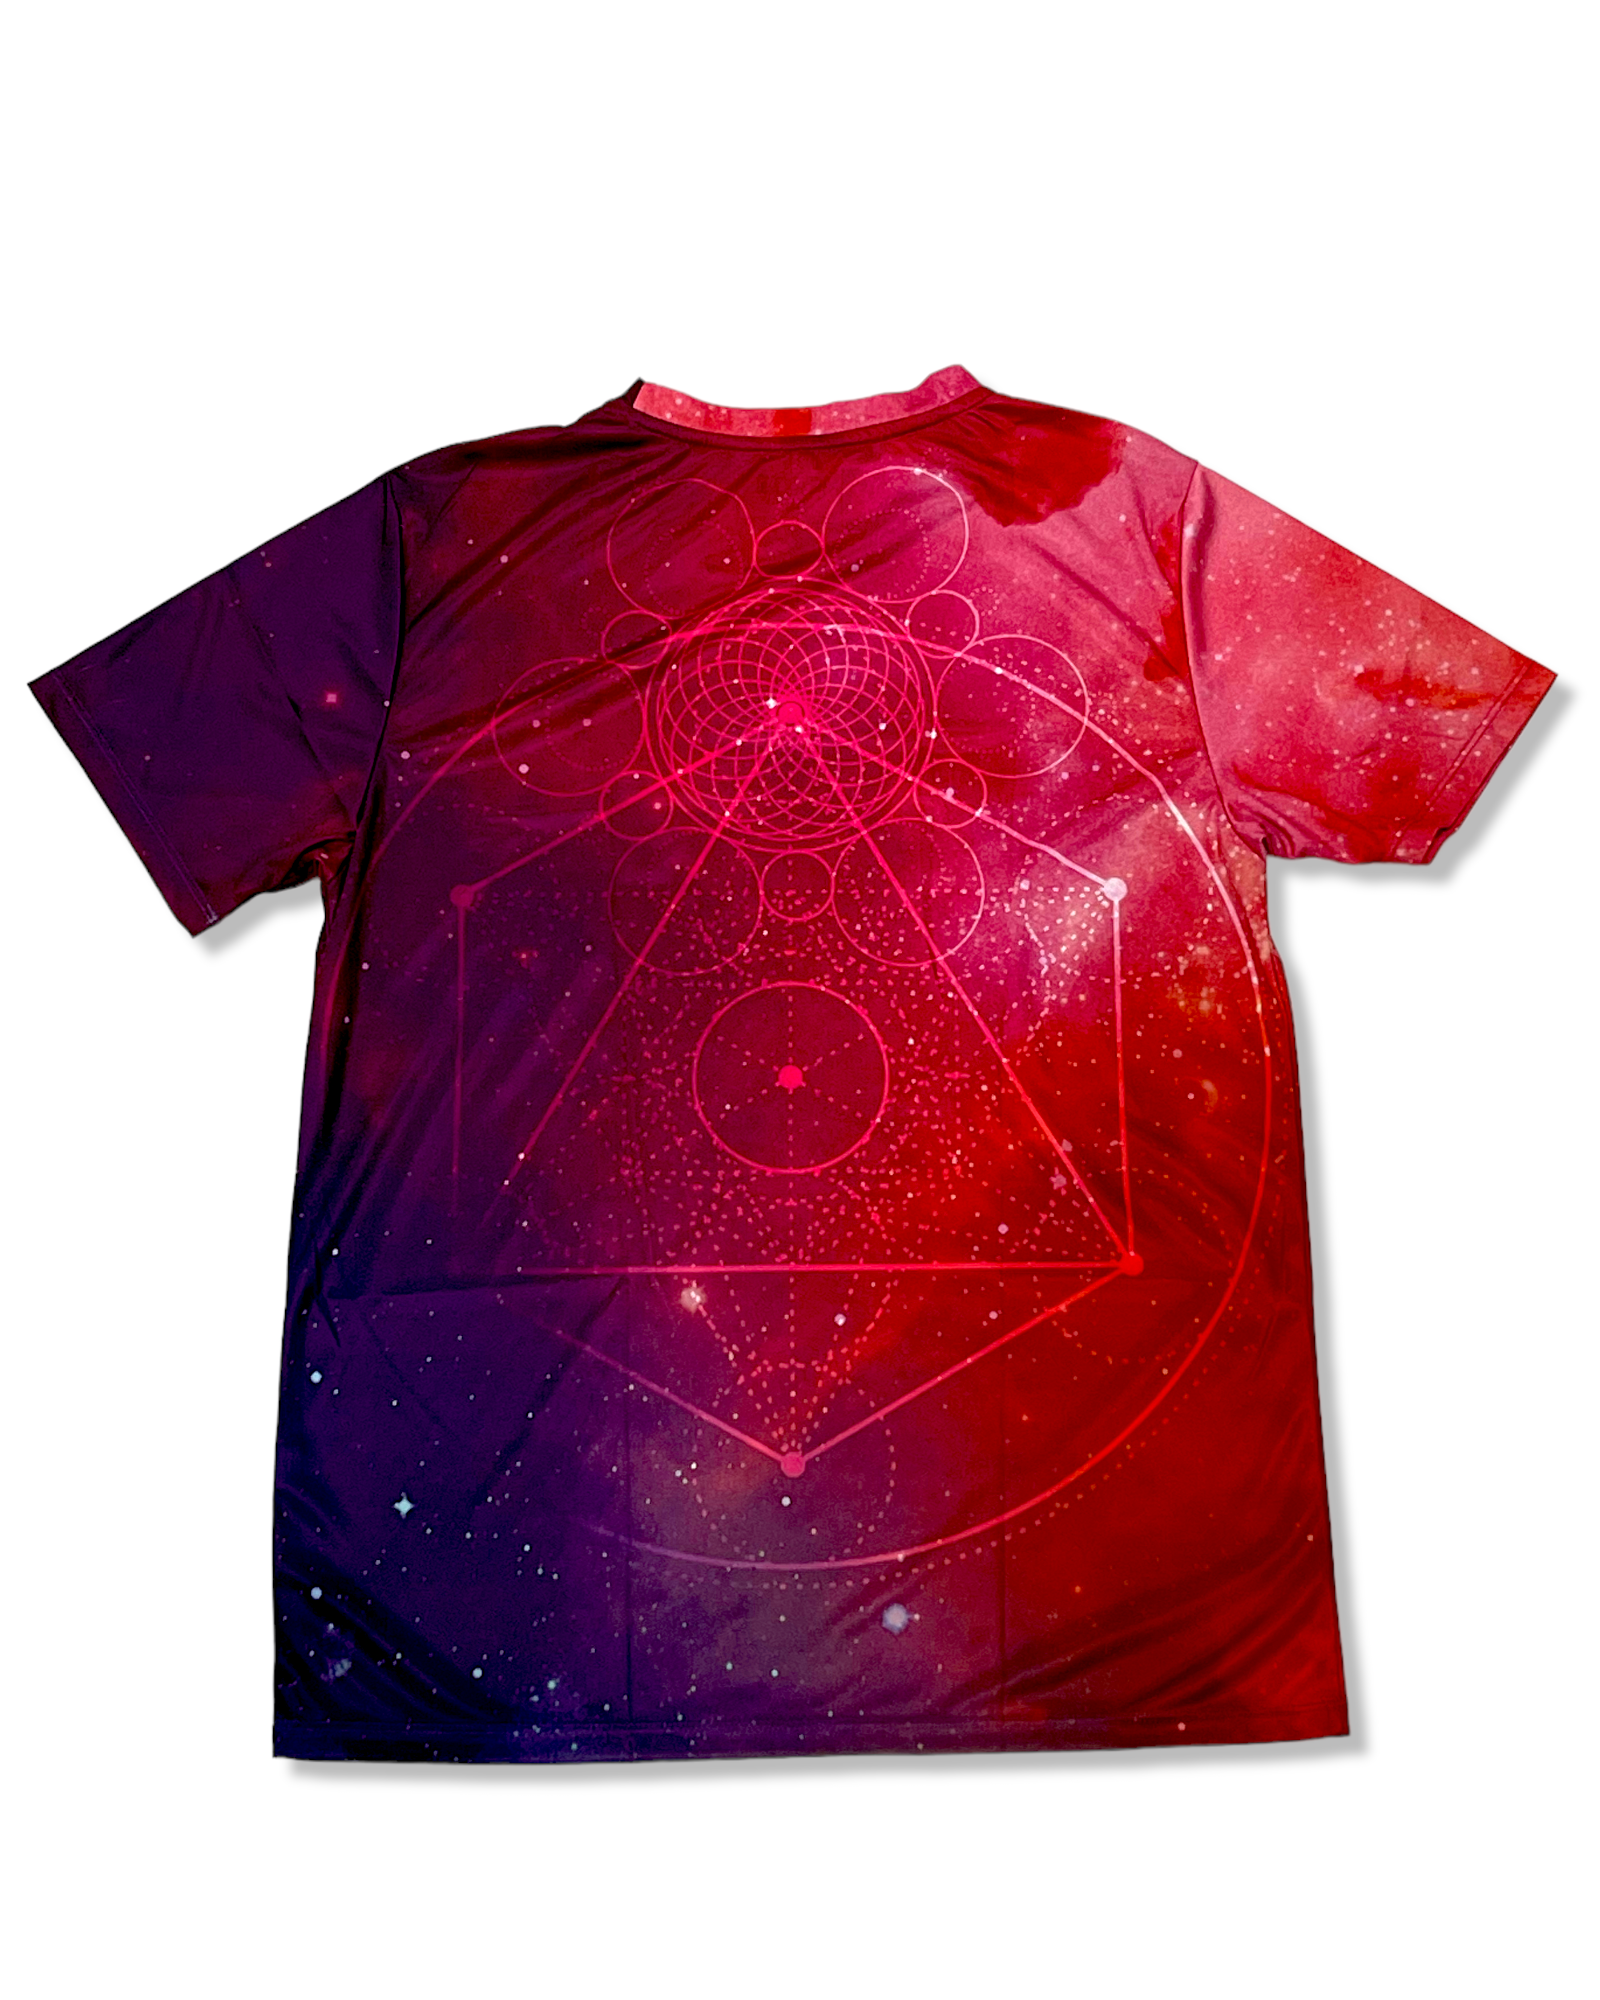 Cosmic Octopus Sublimated T-Shirt